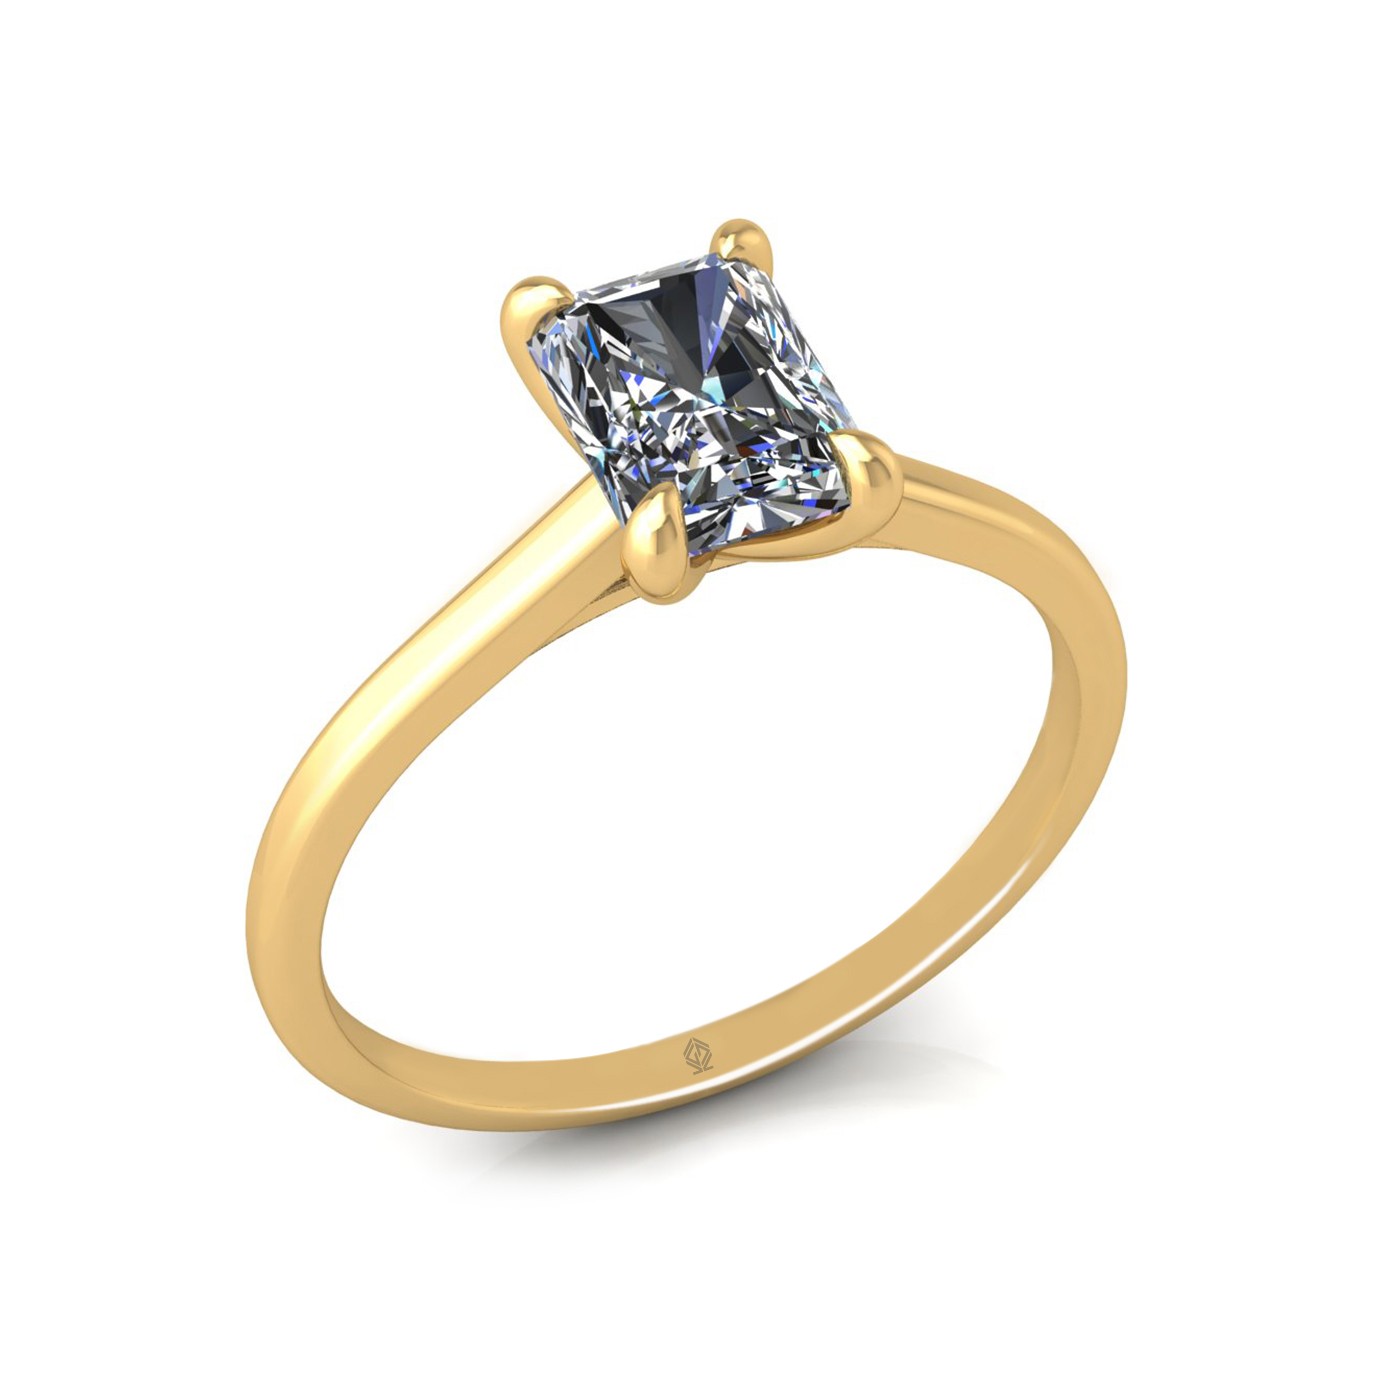 18k yellow gold  1,20 ct 4 prongs solitaire radiant cut diamond engagement ring with whisper thin band